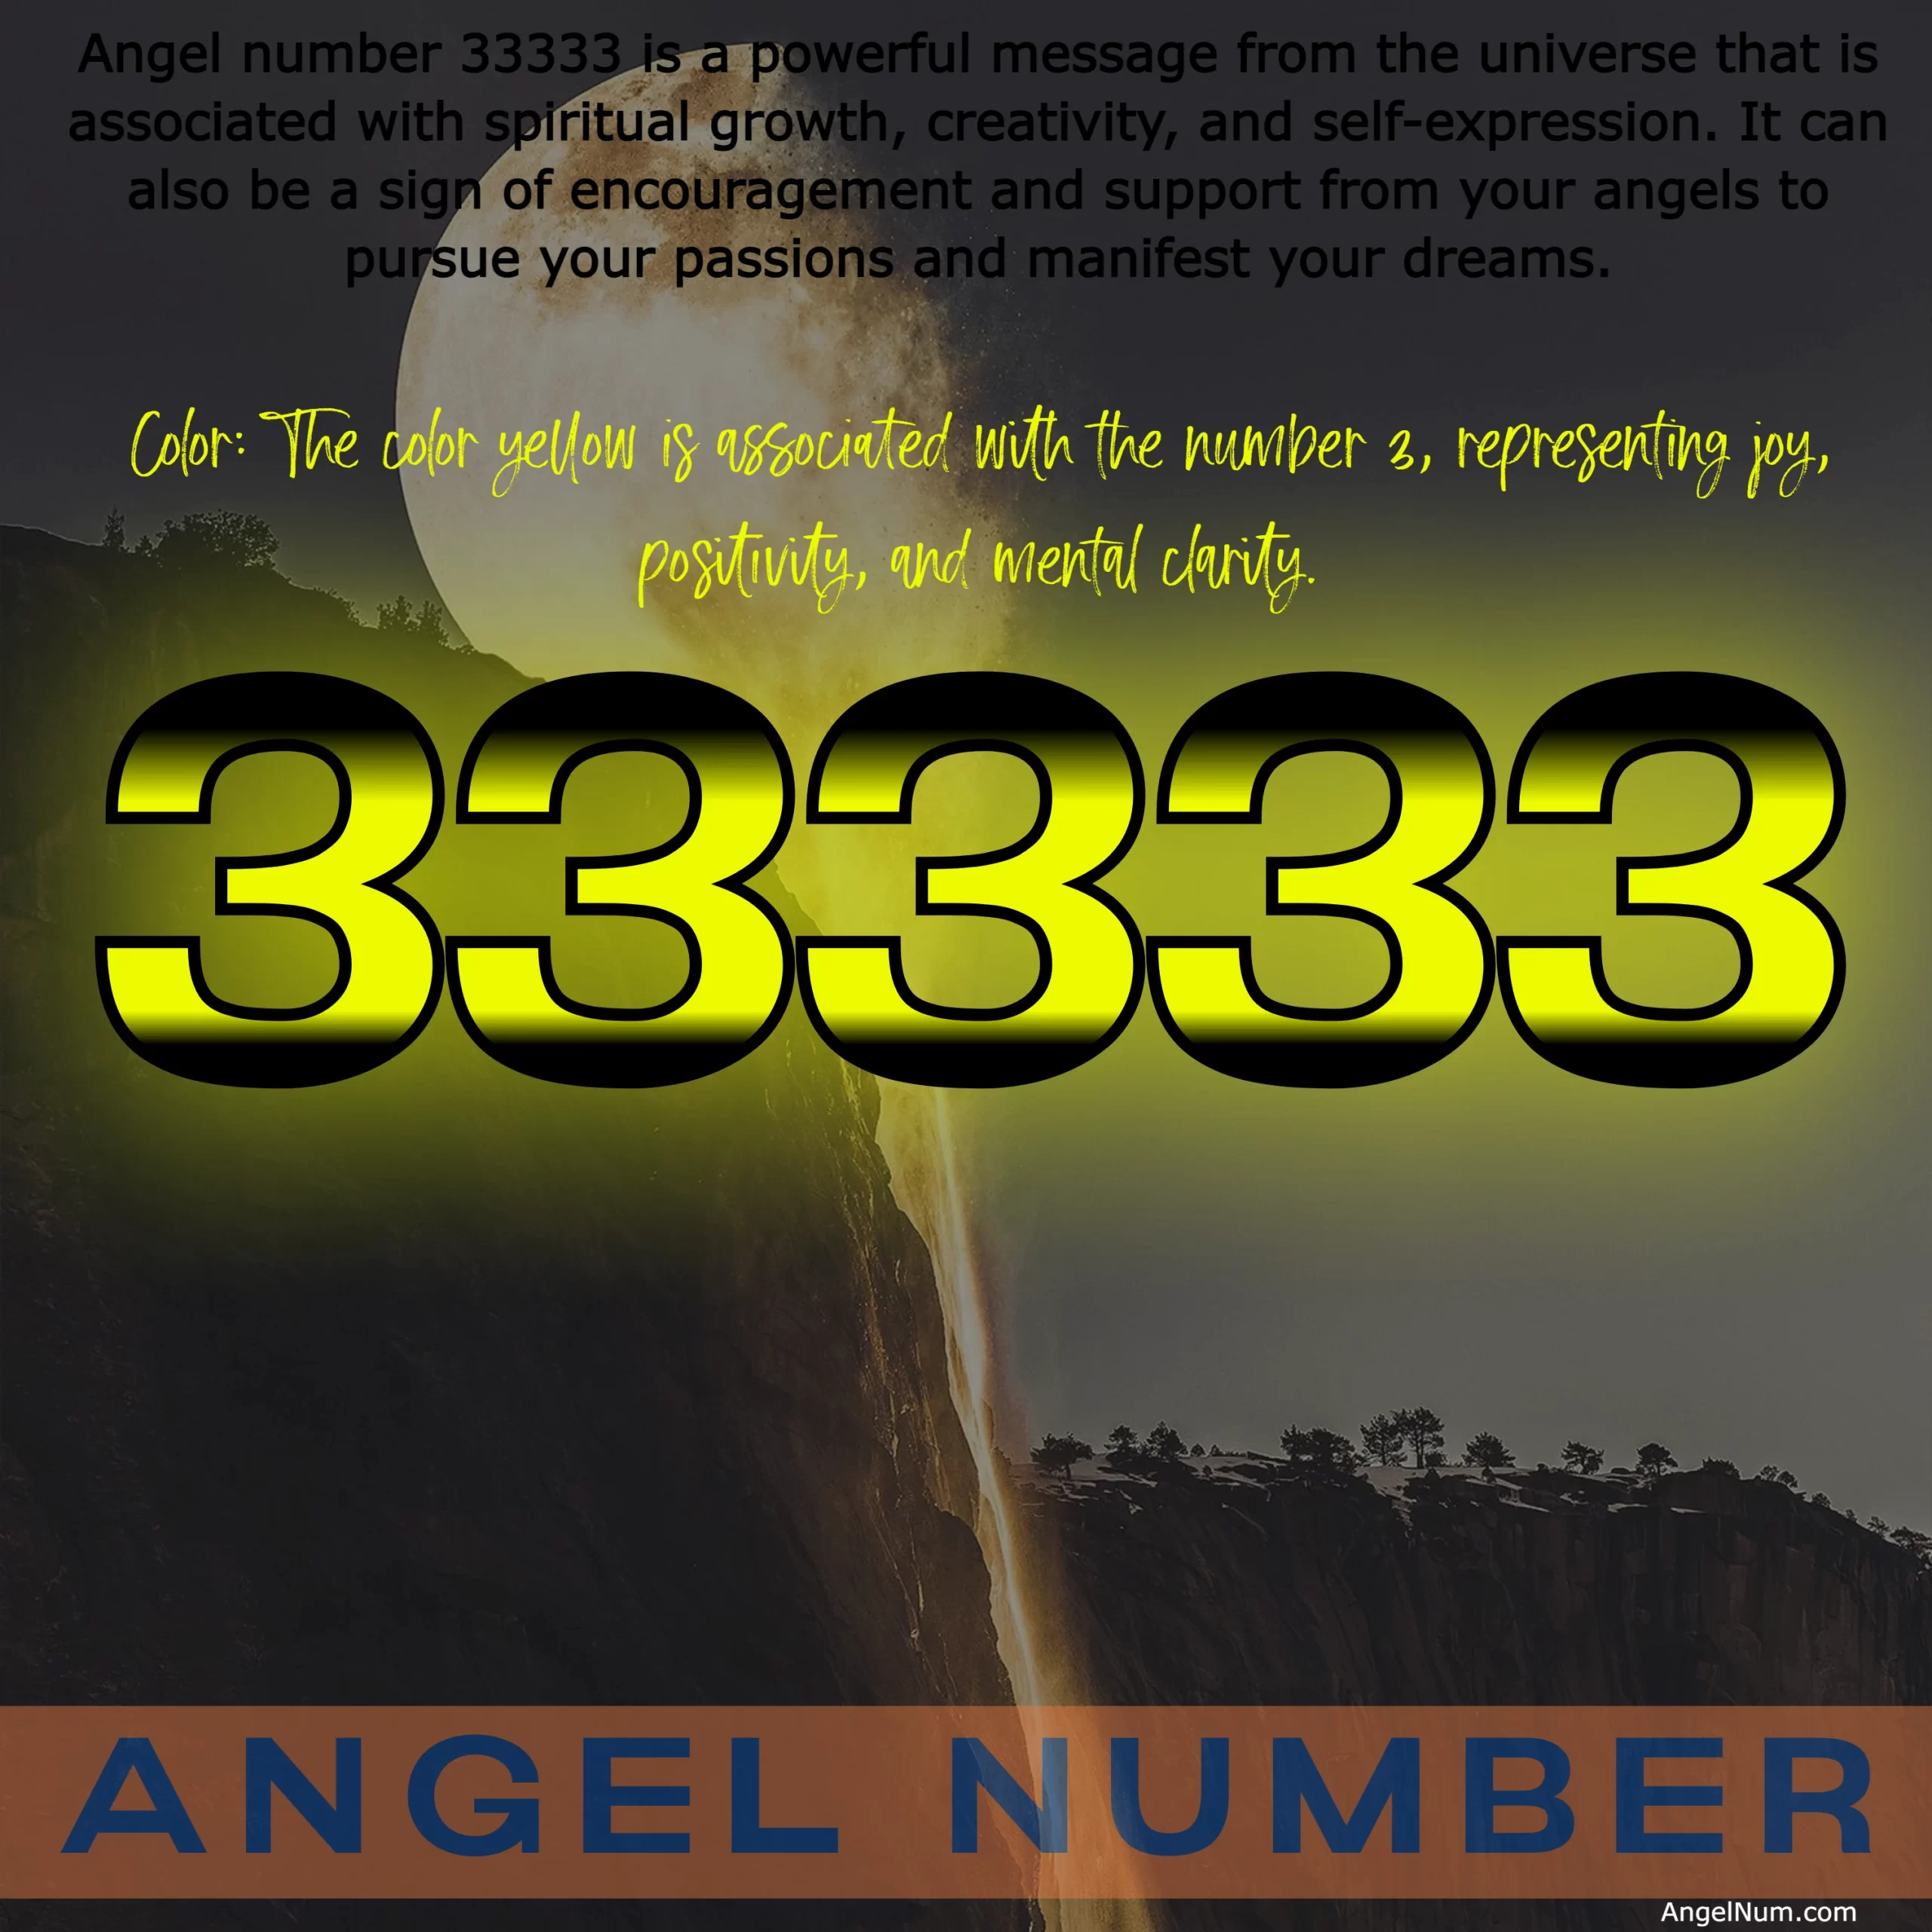 Angel Number 33333: Spiritual Growth and Self-Expression